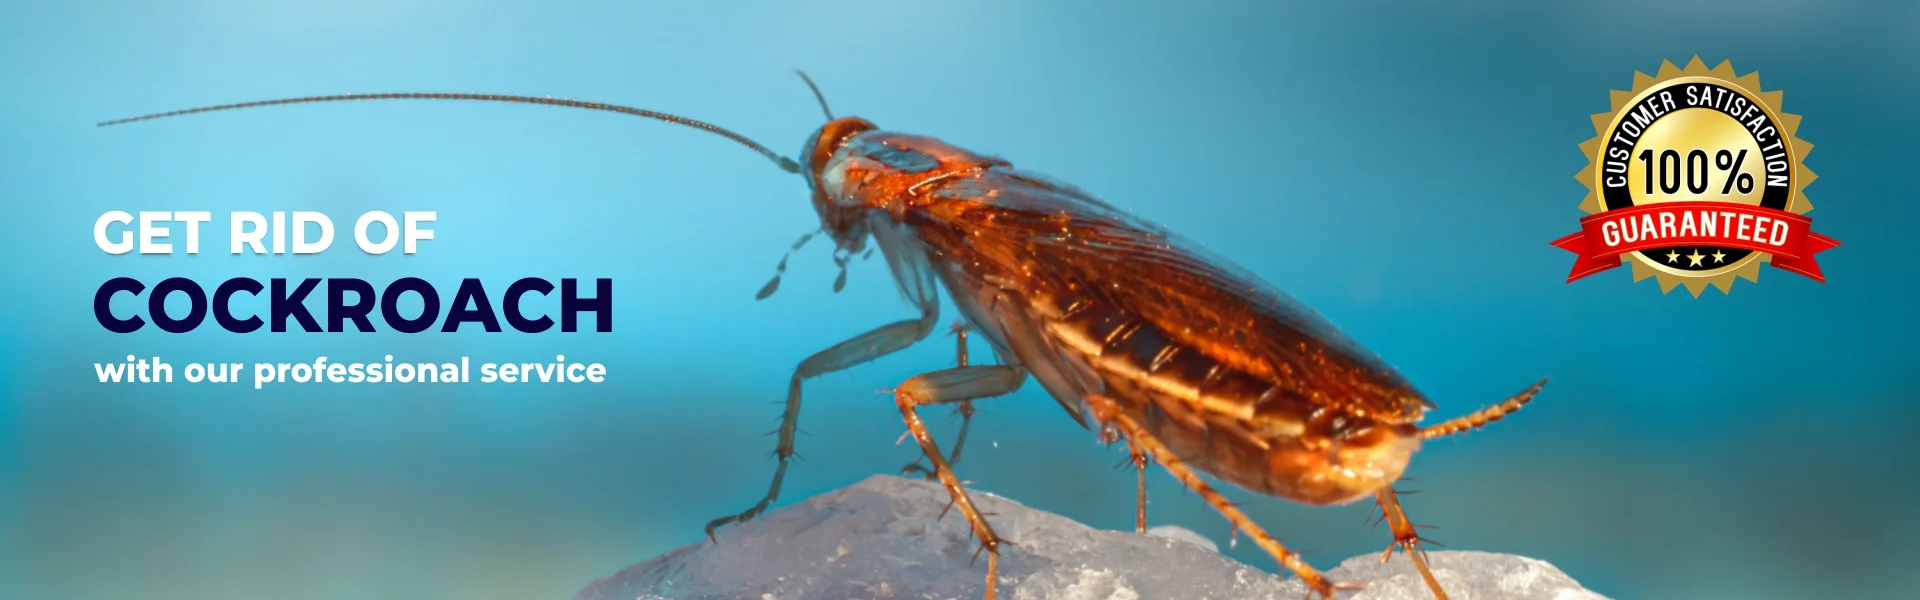 Cockroach control services in Chennai